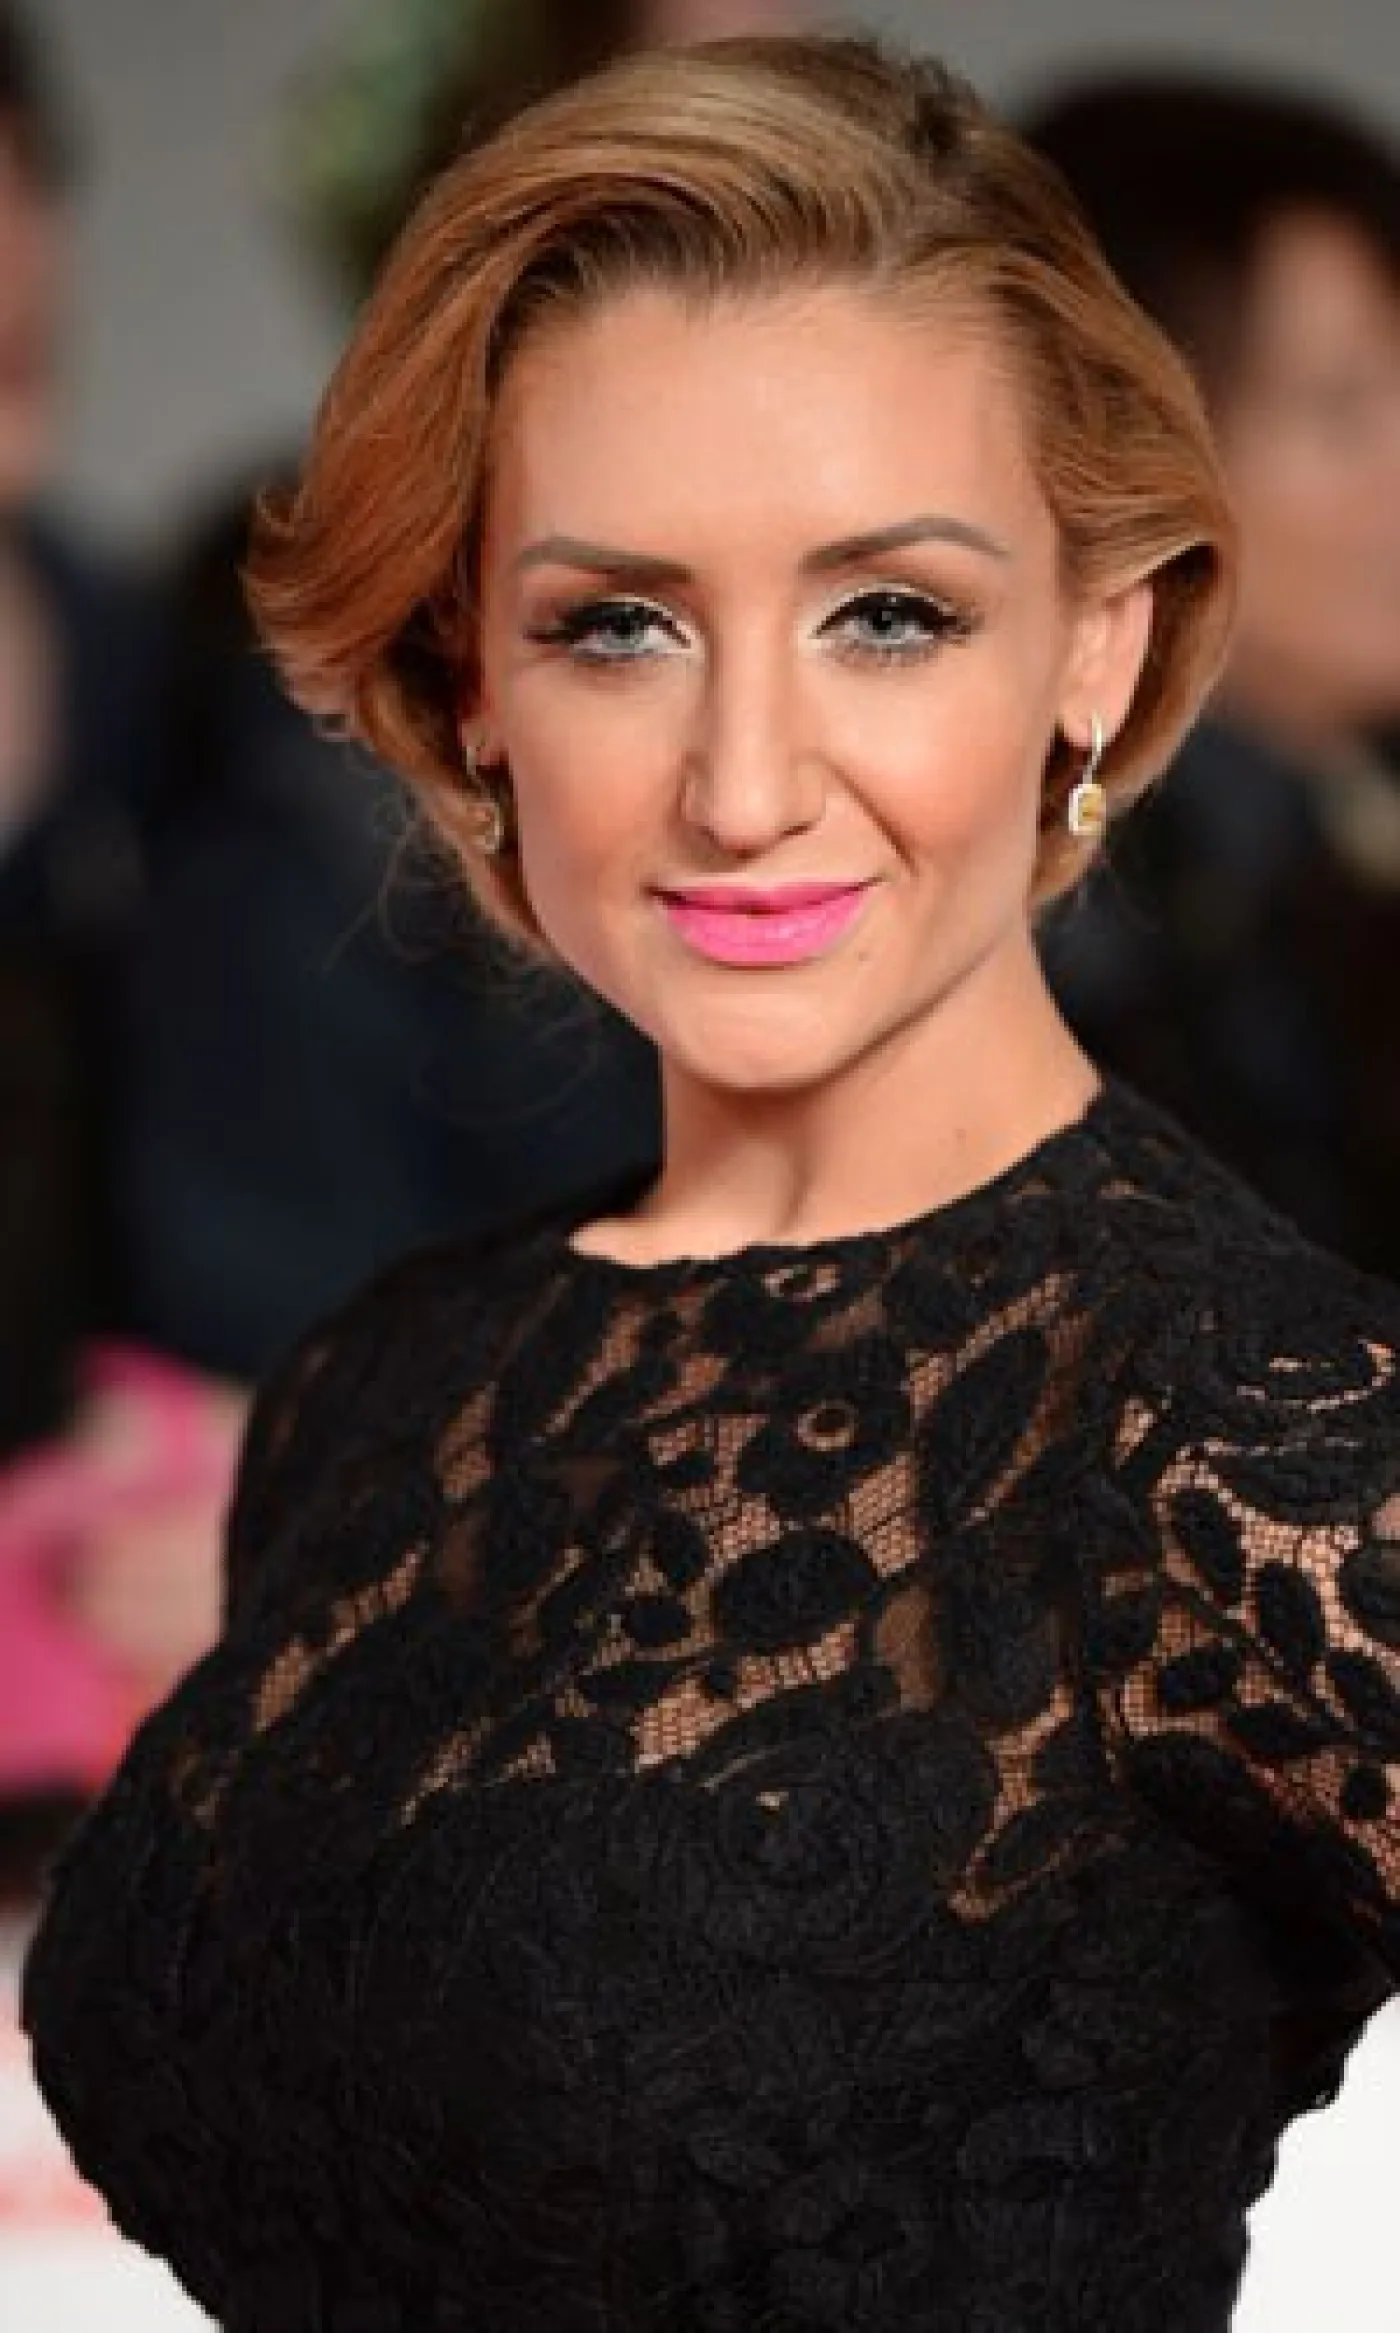 The £6.99 Lipstick Behind Catherine Tyldesley's Ntas Pink Pout!